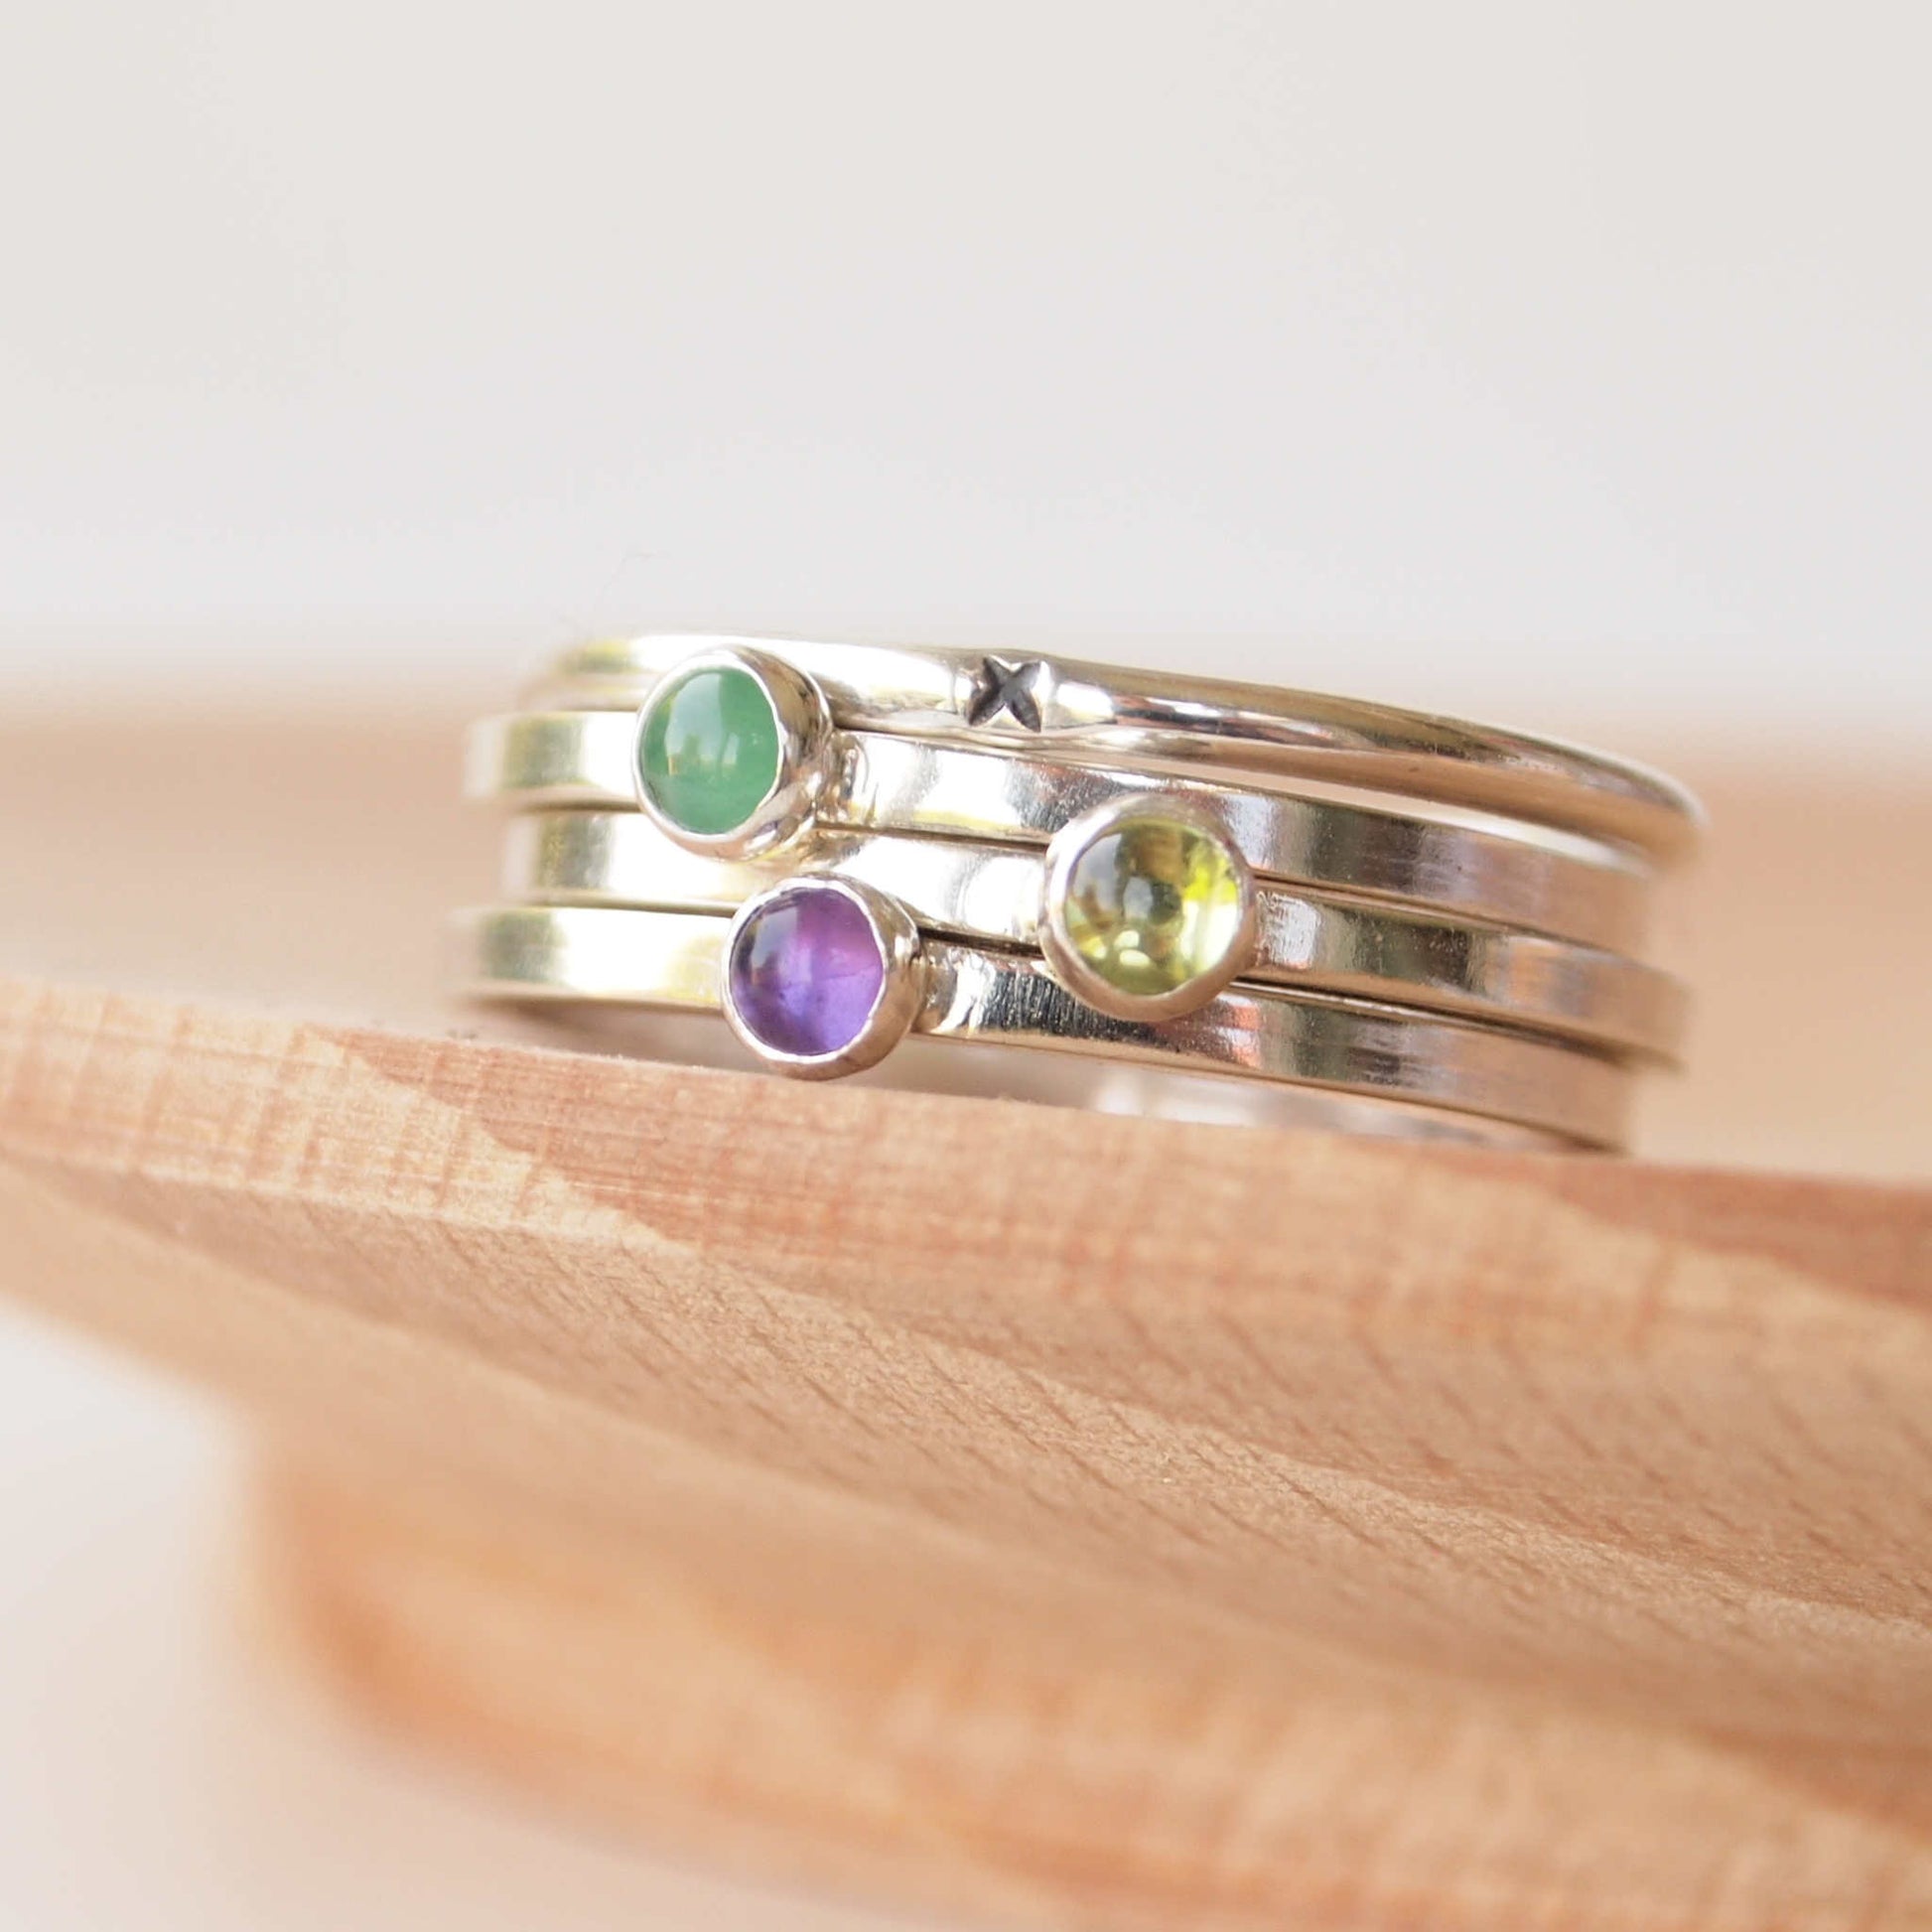 Group of Birthstone rings with May, February and August Birthstones. Features Green Emerald, Purple Amethyst and green Peridot, all in sterling silver and modern square bands. Handmade bot maram jewellery in Scotland